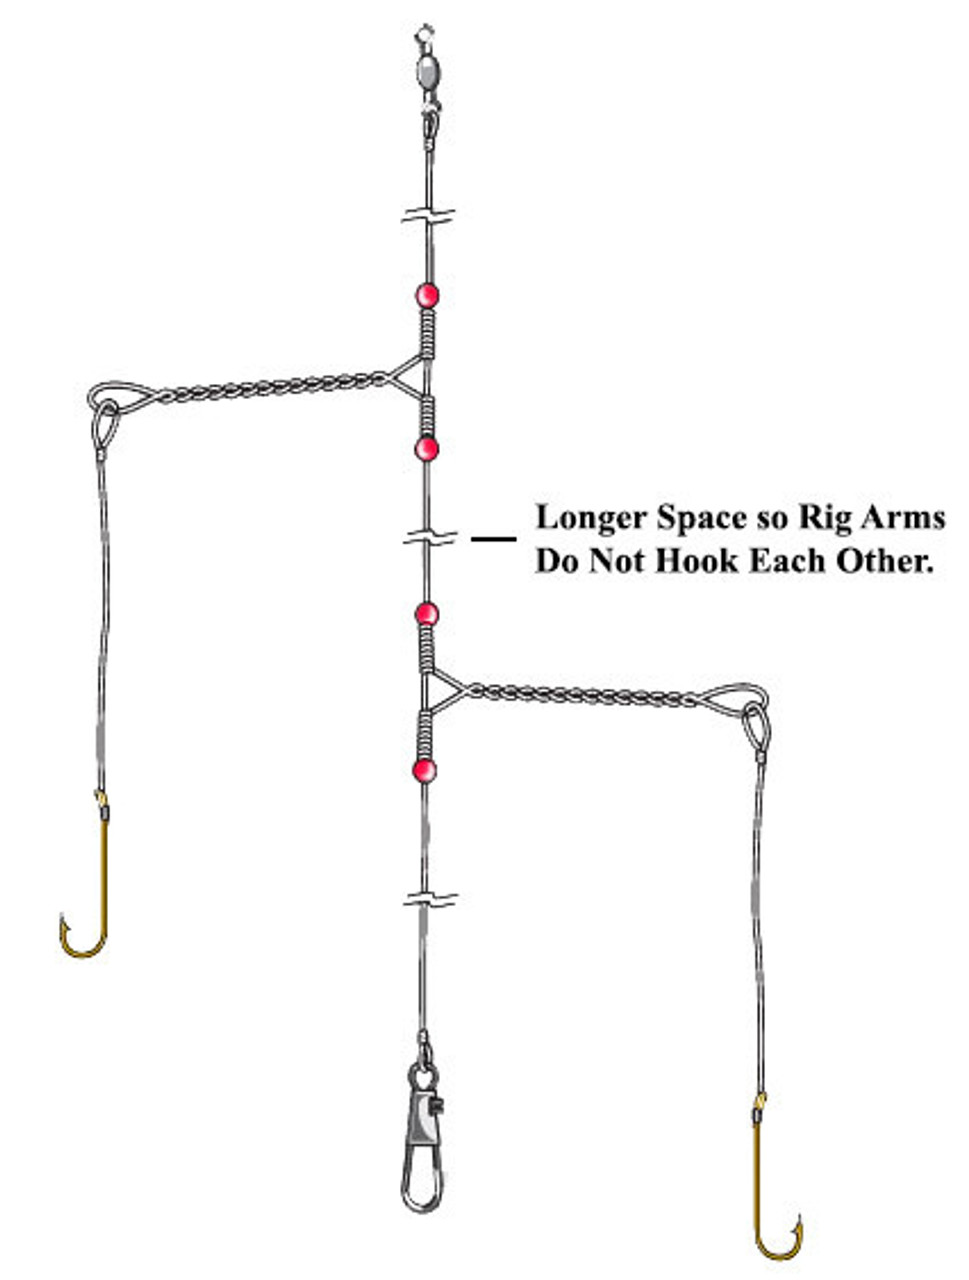 Crappie Rig Arm Stainless Steel - Barlow's Tackle